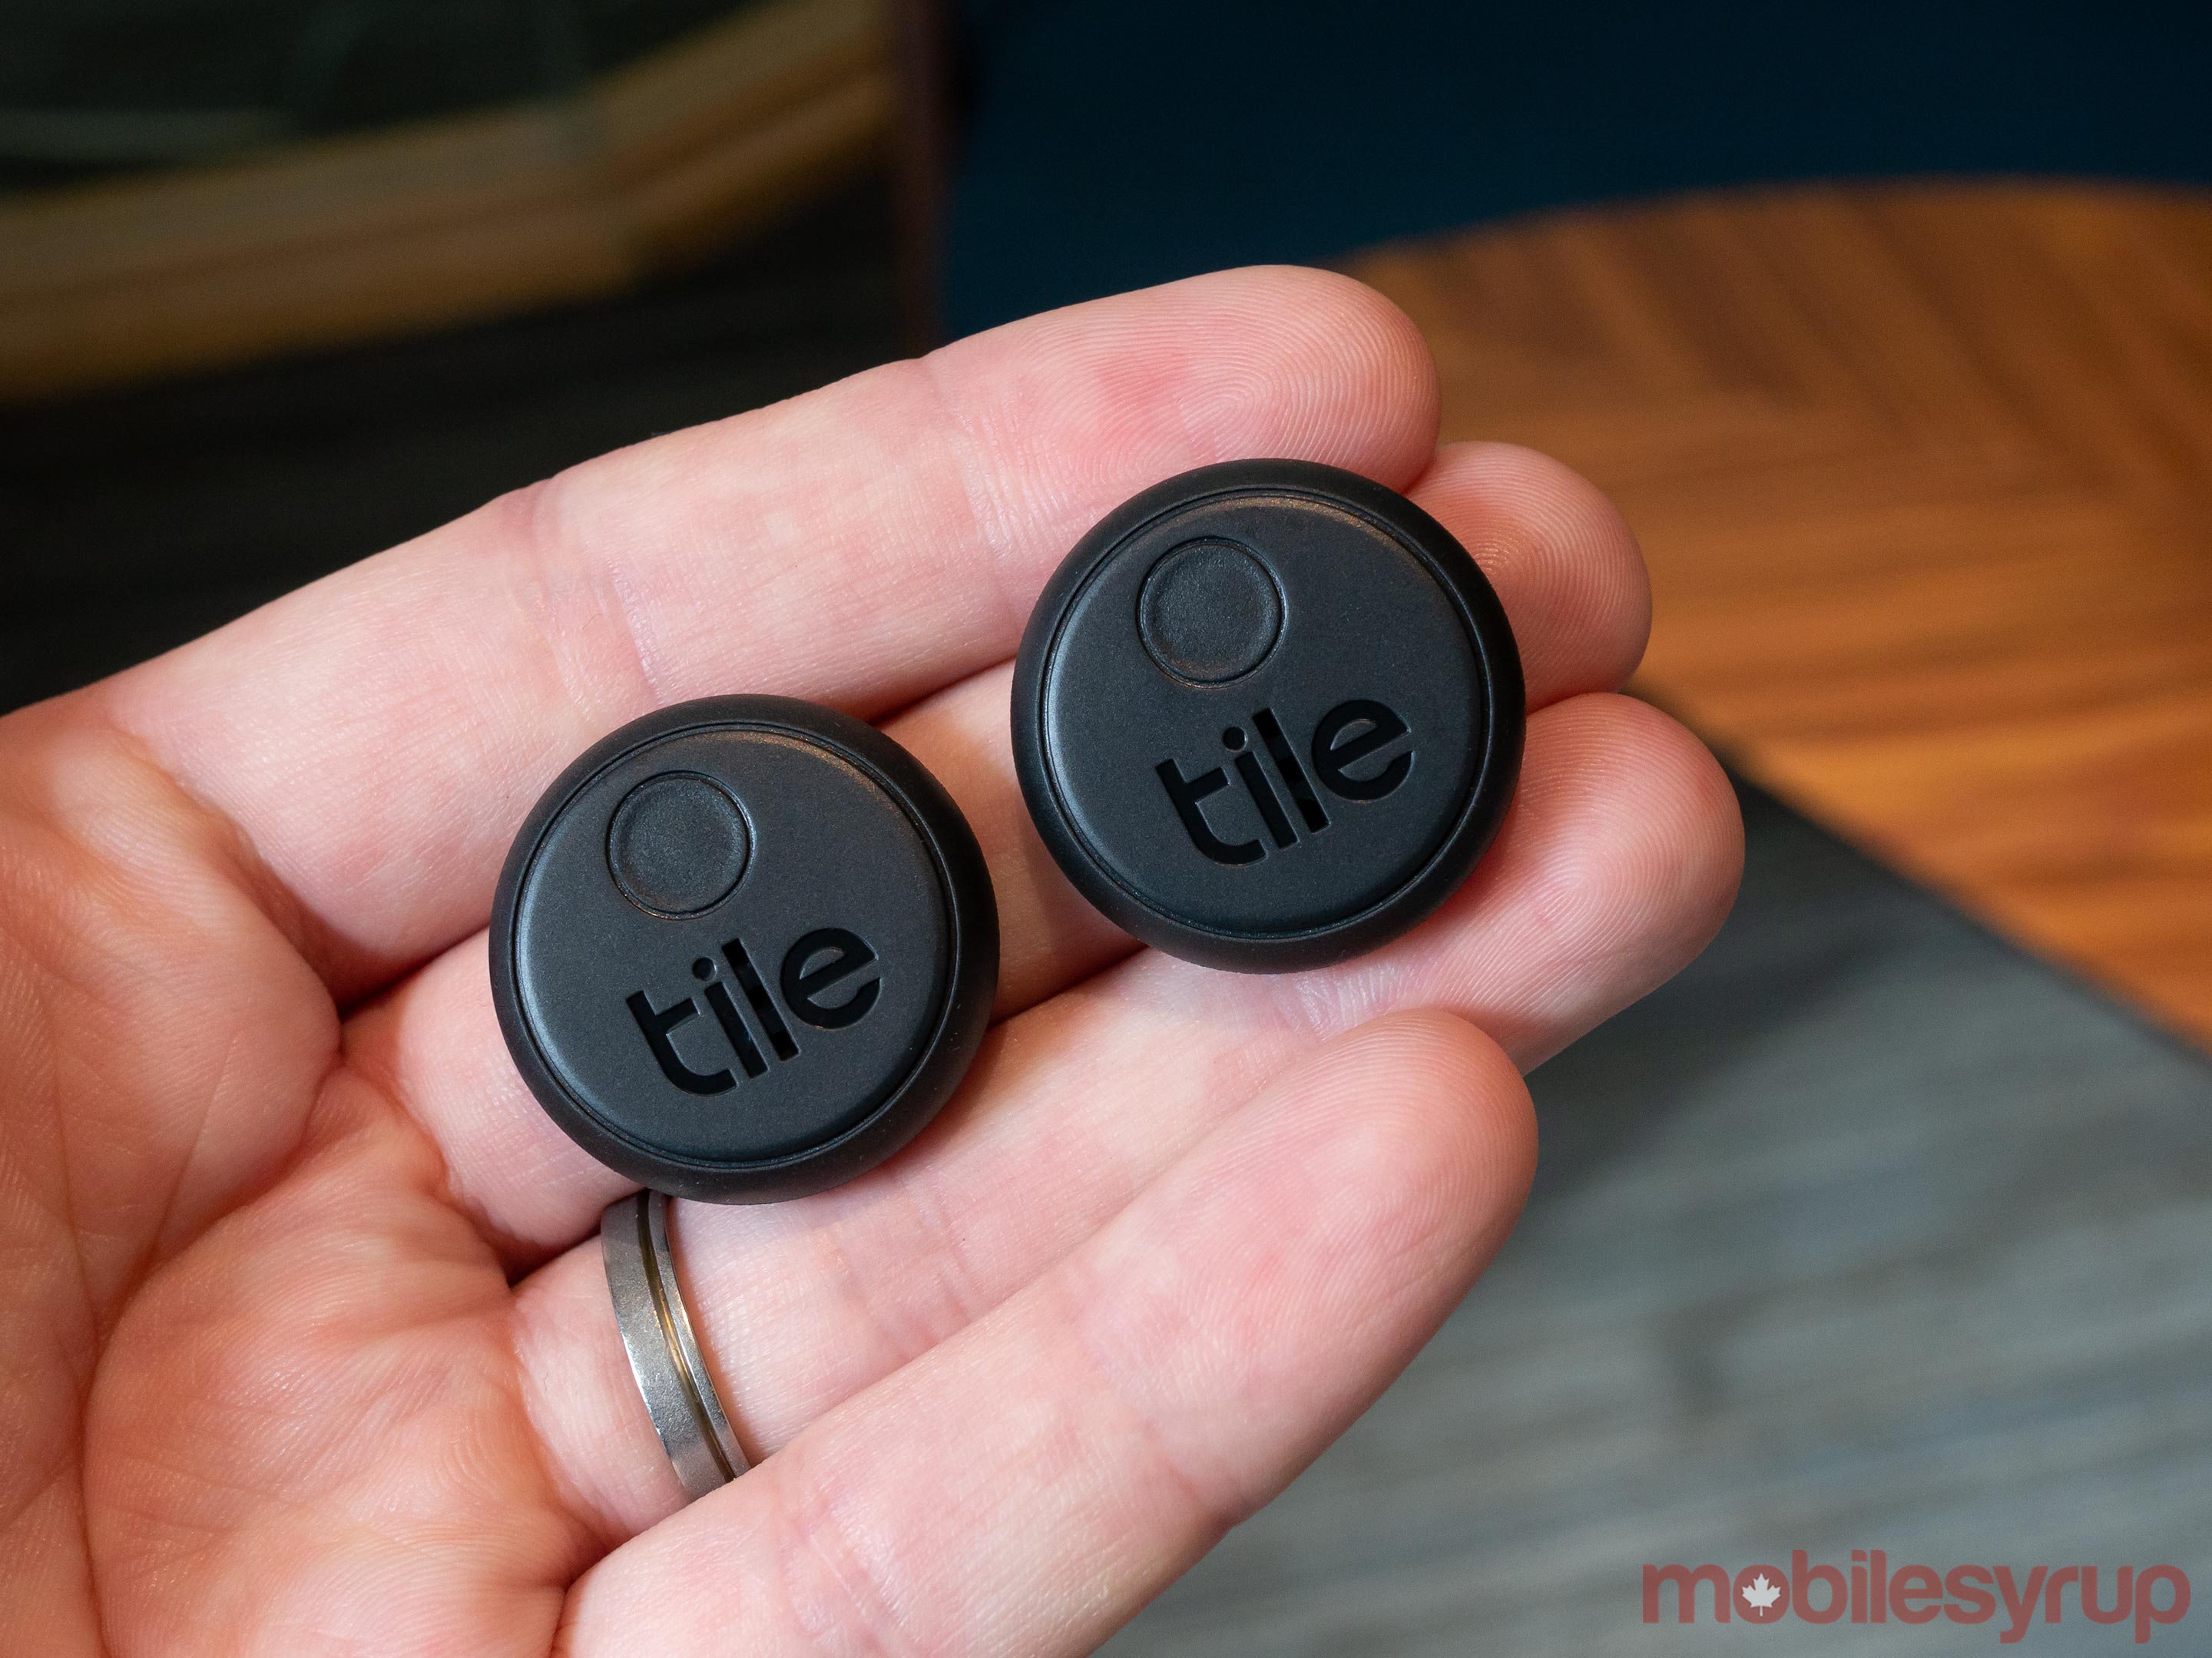 Tile reveals new Bluetooth trackers, including Sticker, refreshed Slim